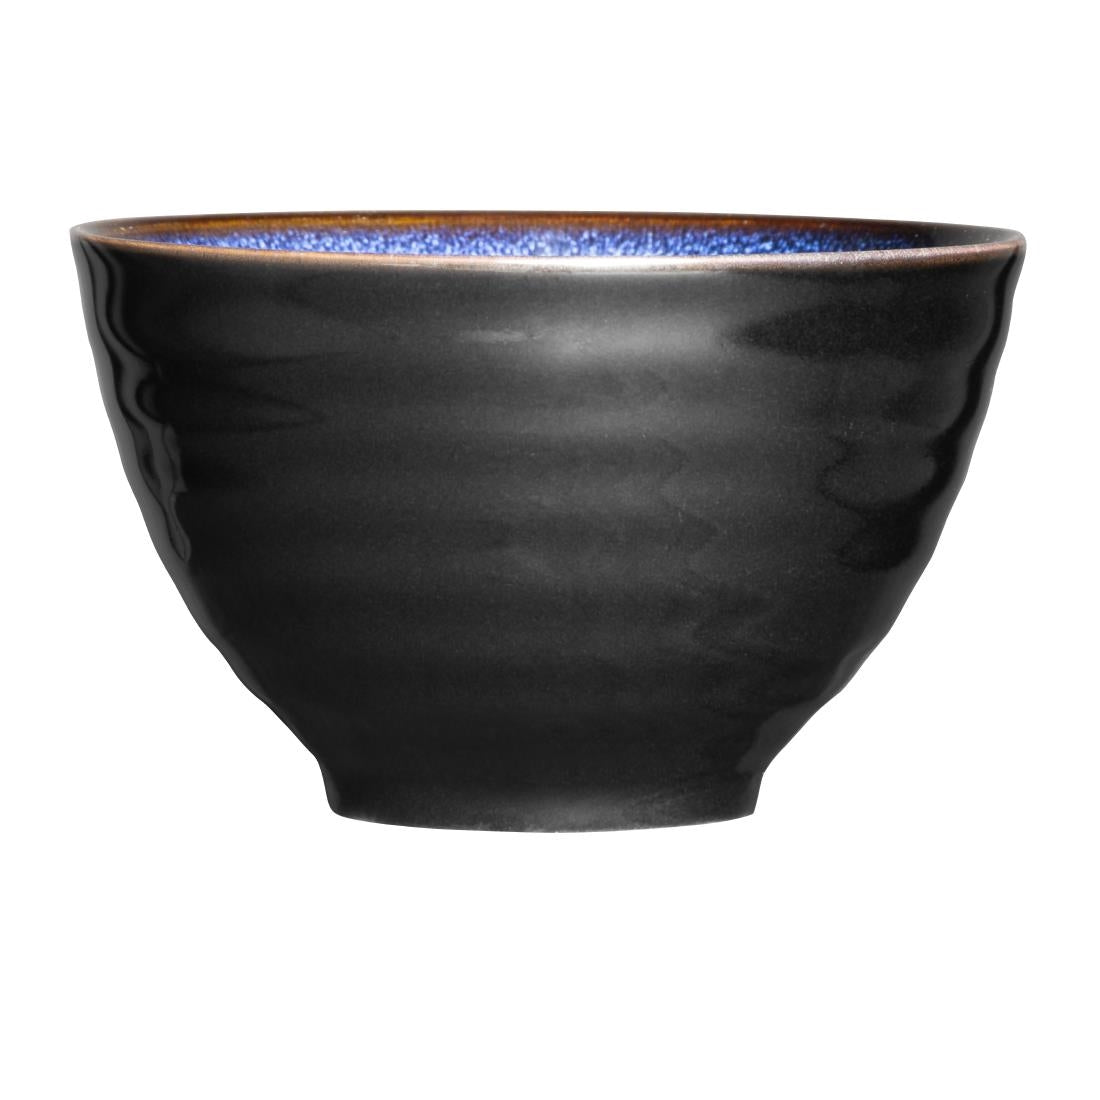 DZ774 Olympia Luna Midnight Blue Footed Bowls 115mm (Pack of 8)